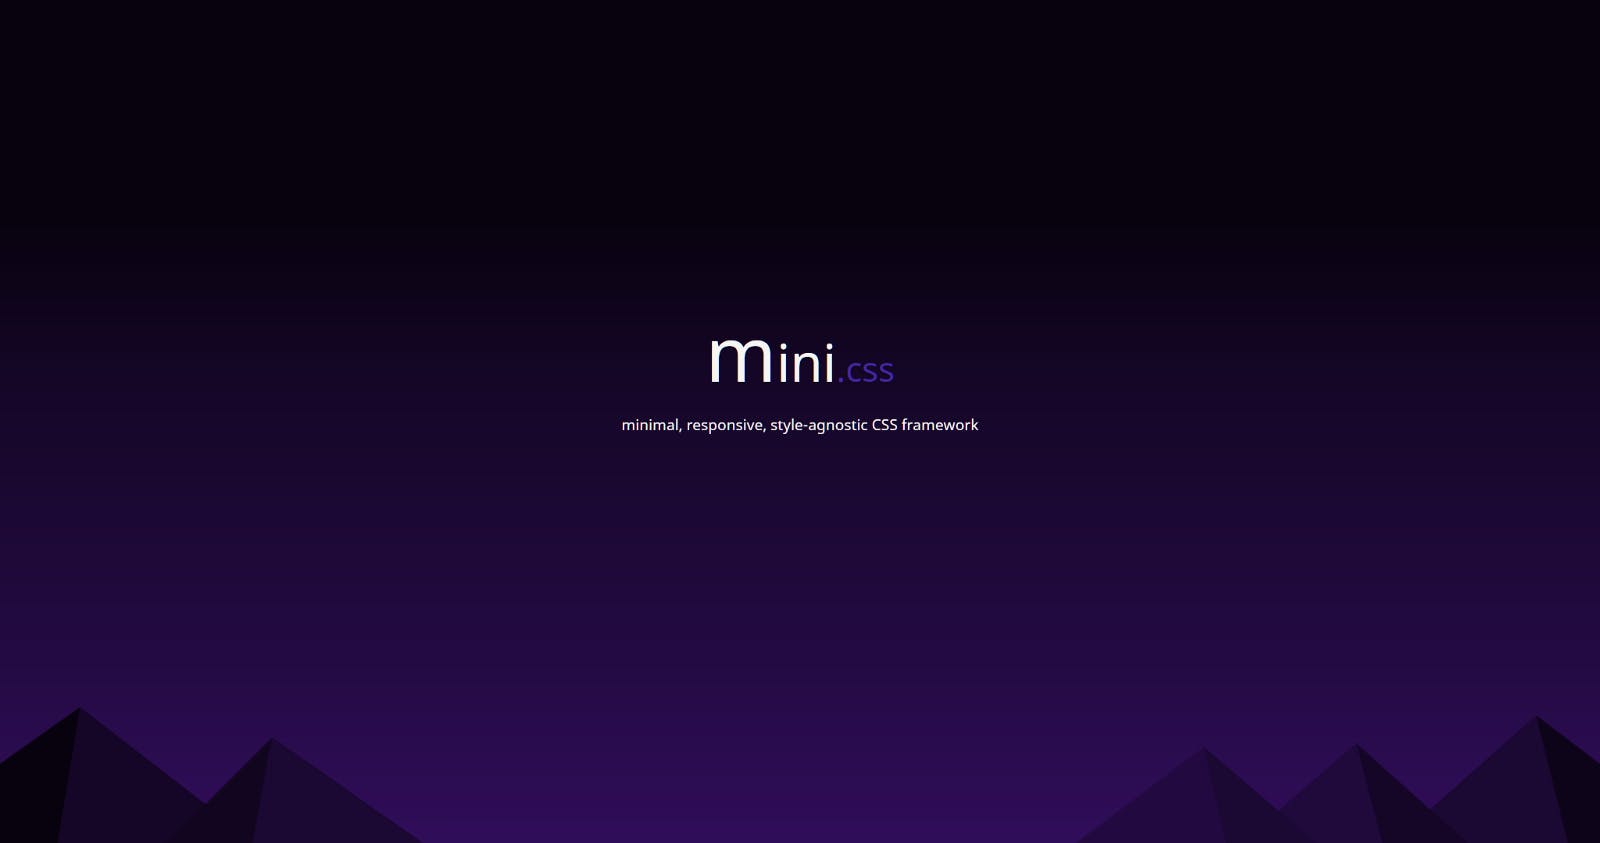 featured image - 5 reasons to try out mini.css